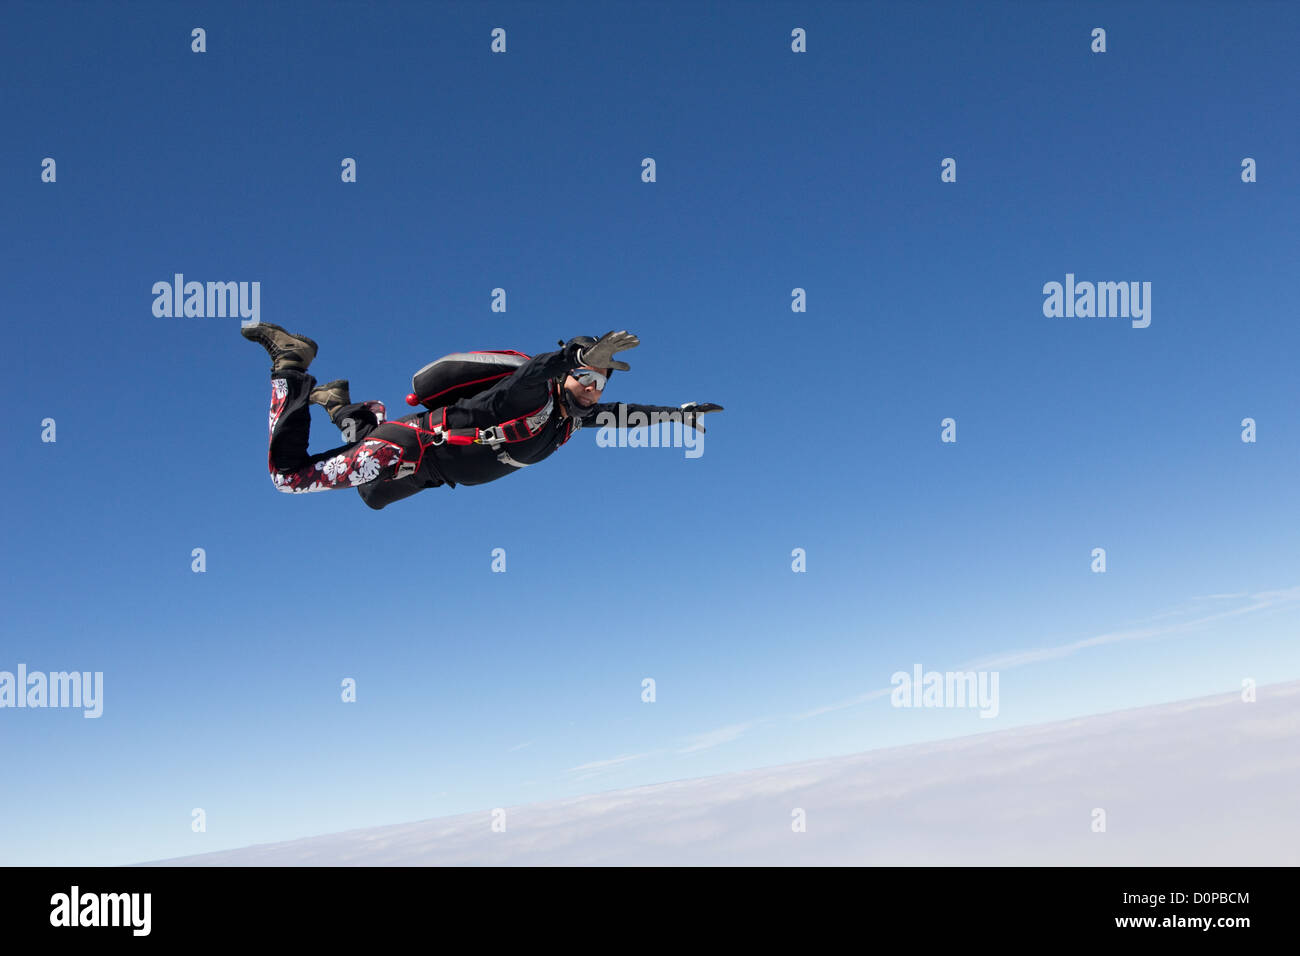 Senior Skydiver is falling through the blue sky with over 120mph. He started this sport to feel younger as a pensioner. Stock Photo